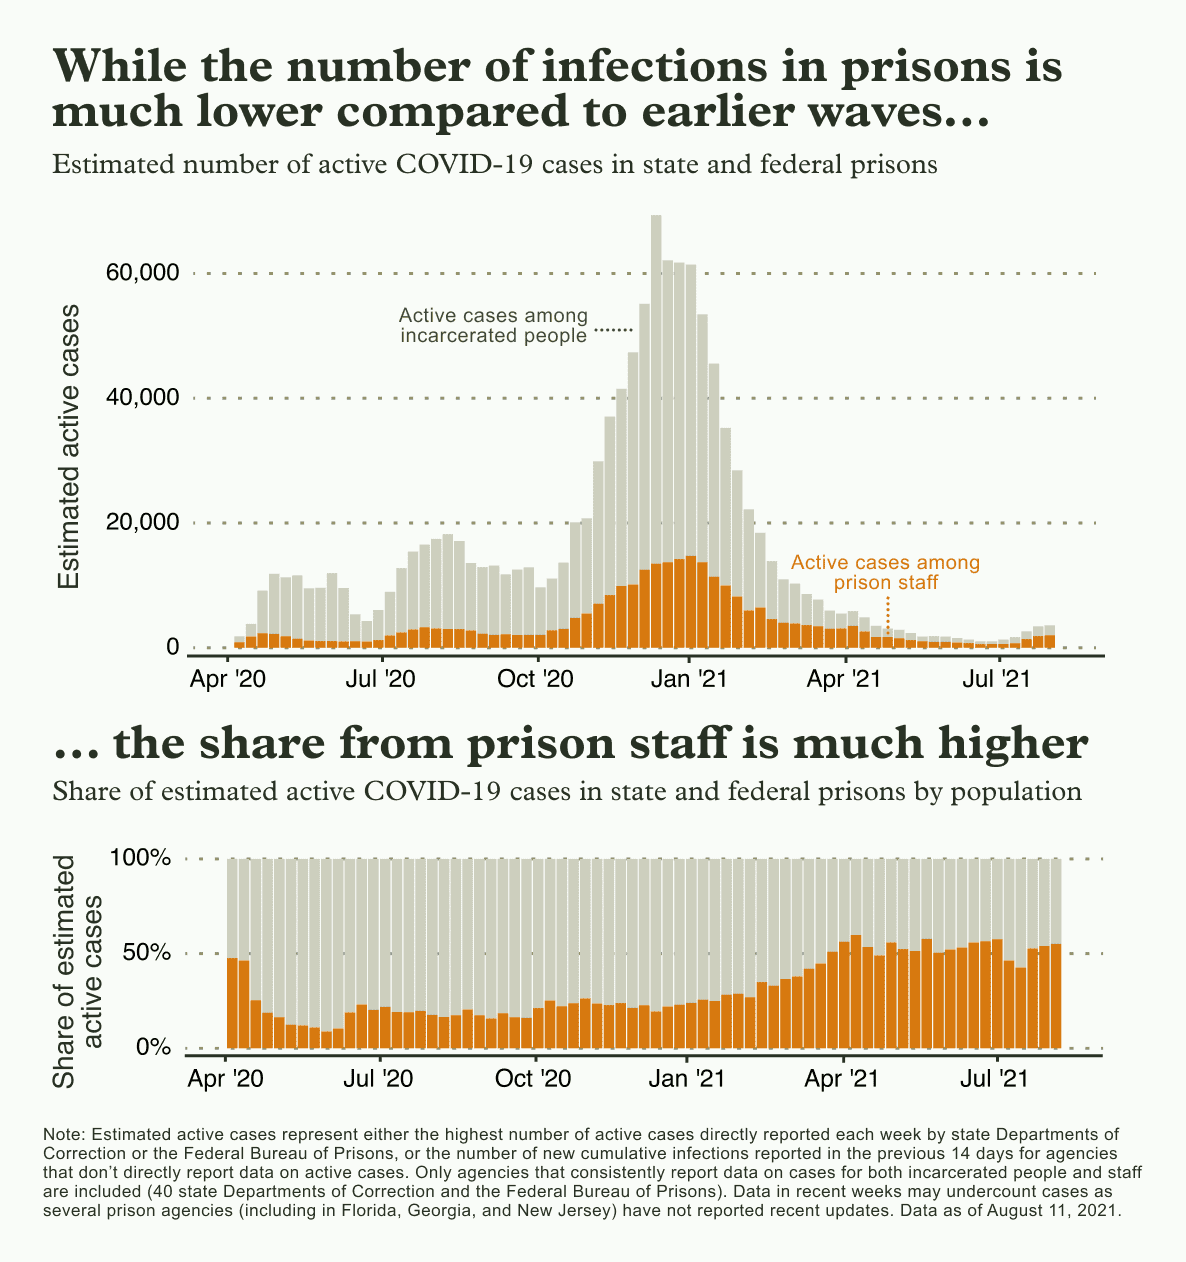 Graph showing that while the number of infections in prisons is much lower compared to earlier waves, the share from prison staff is much higher 